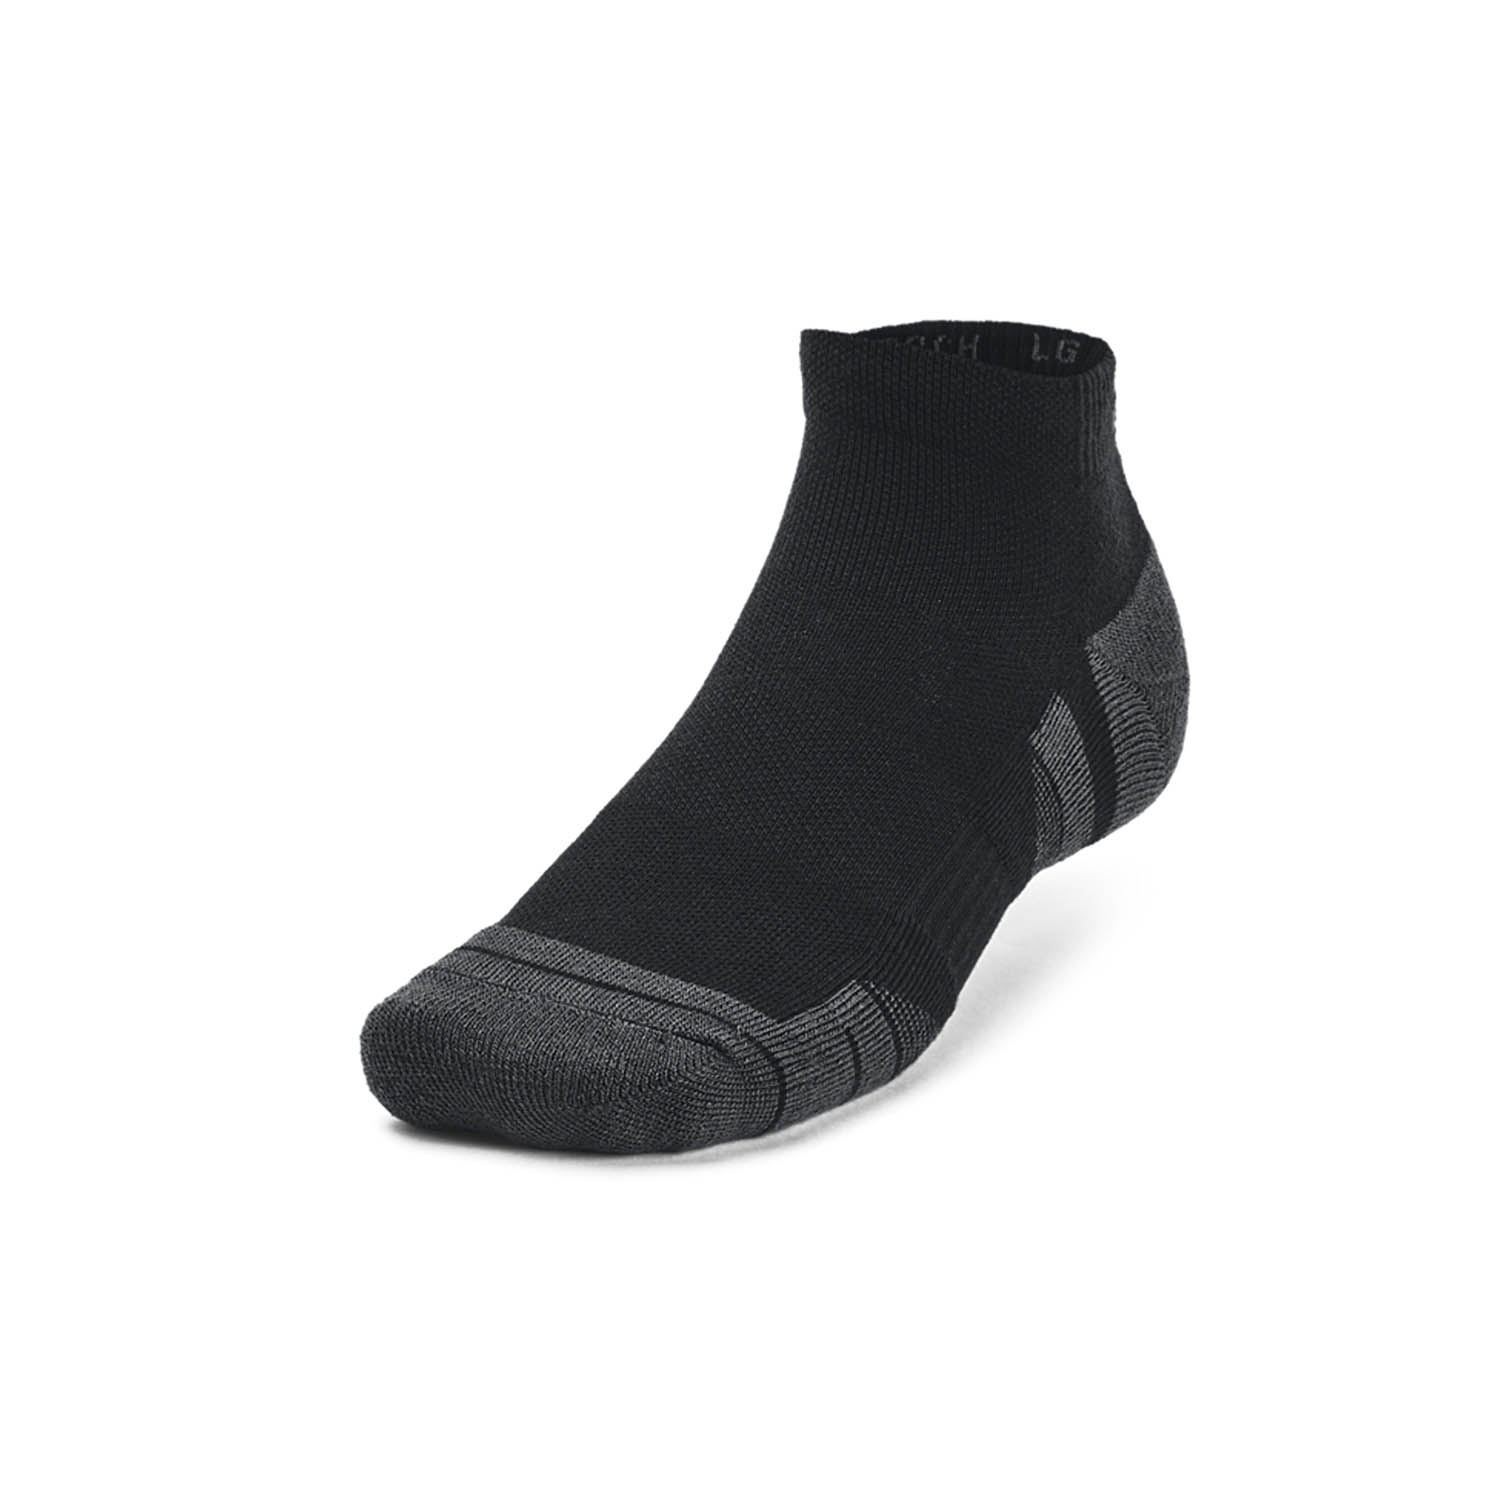 Under Armour Performance Tech Low x 3 Calcetines - Black/Jet Gray